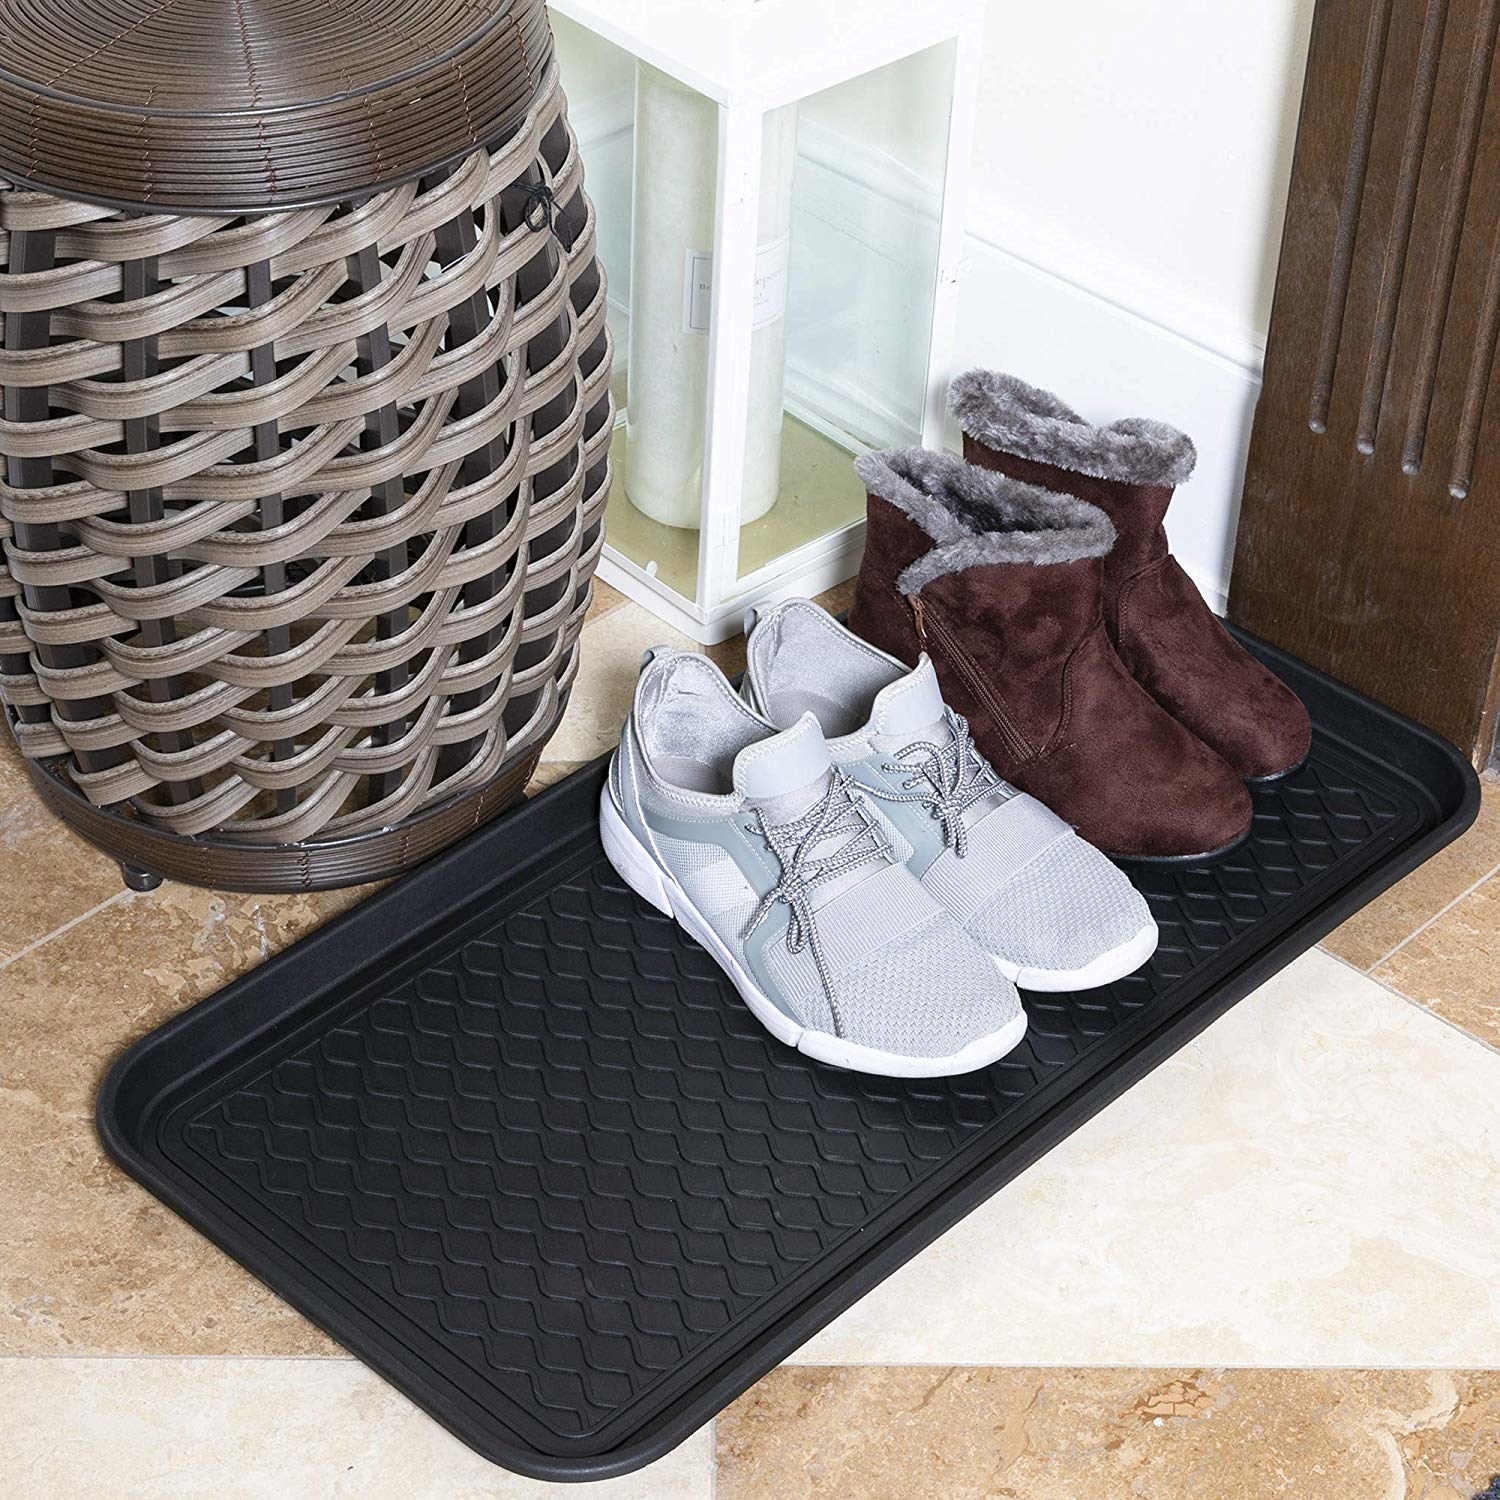 the shoe tray with a pair of sneakers and a pair of boots sitting on them